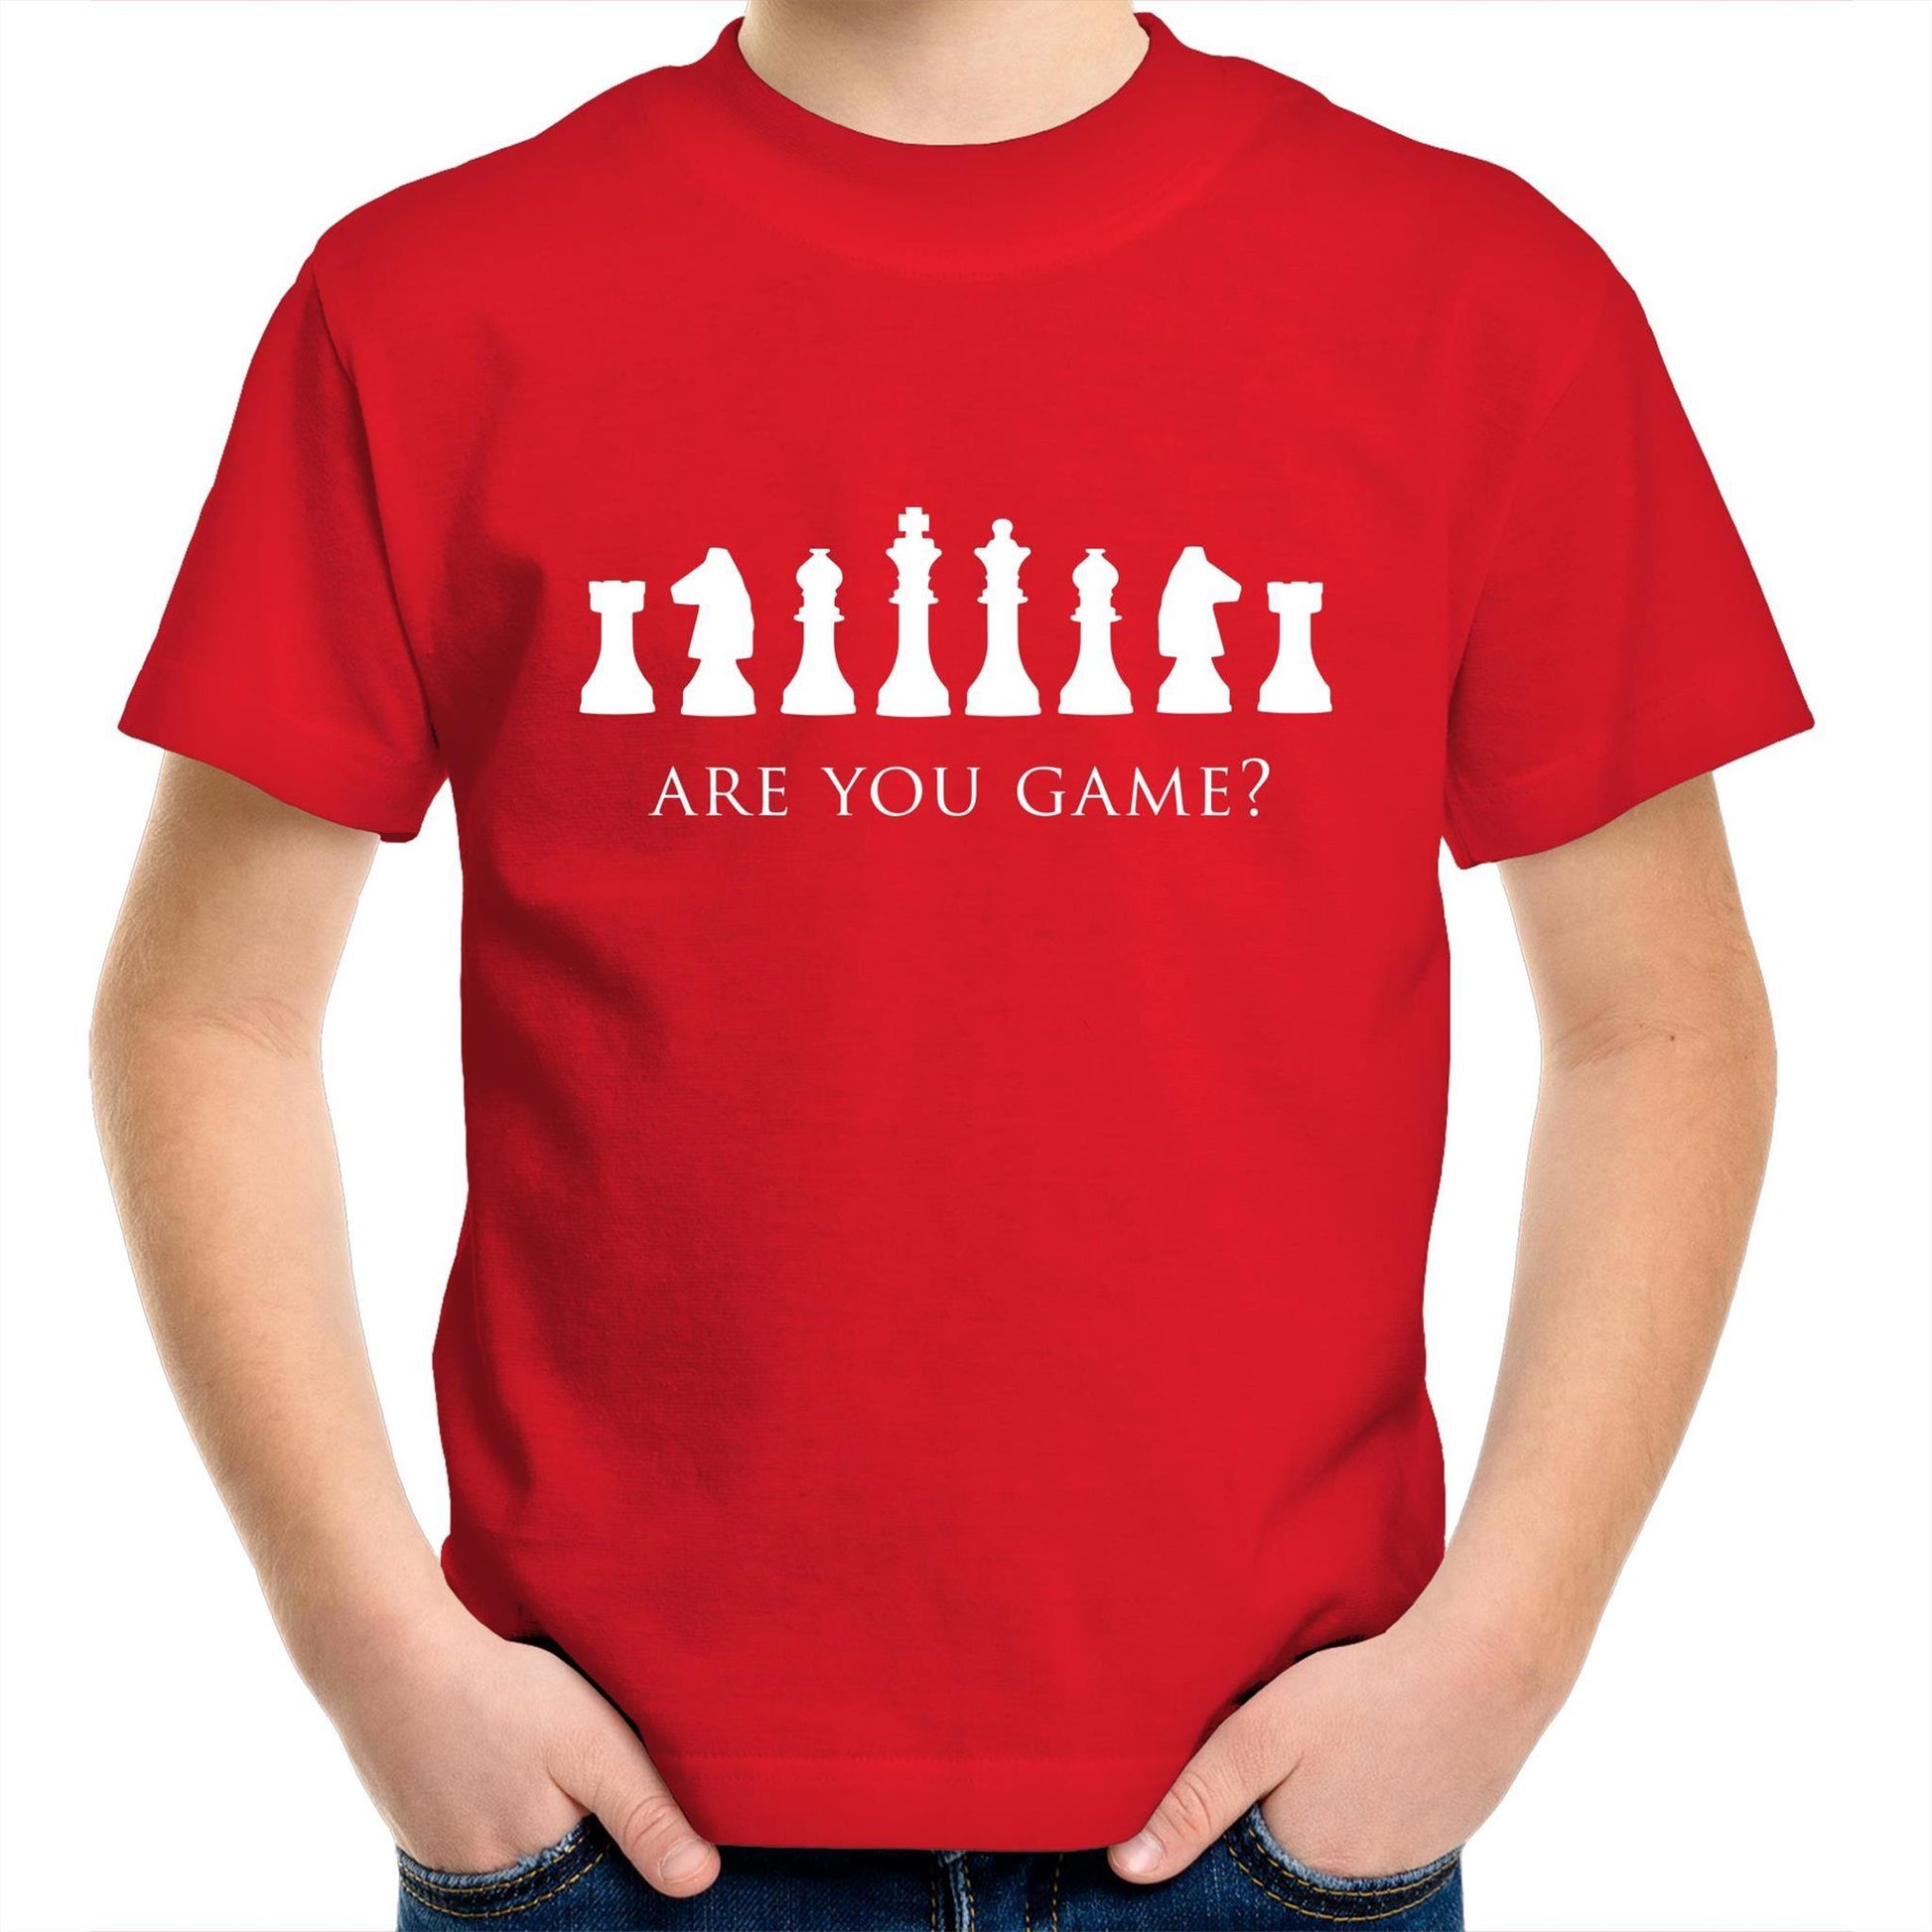 Are You Game - Kids Youth Crew T-shirt Red Kids Youth T-shirt Chess